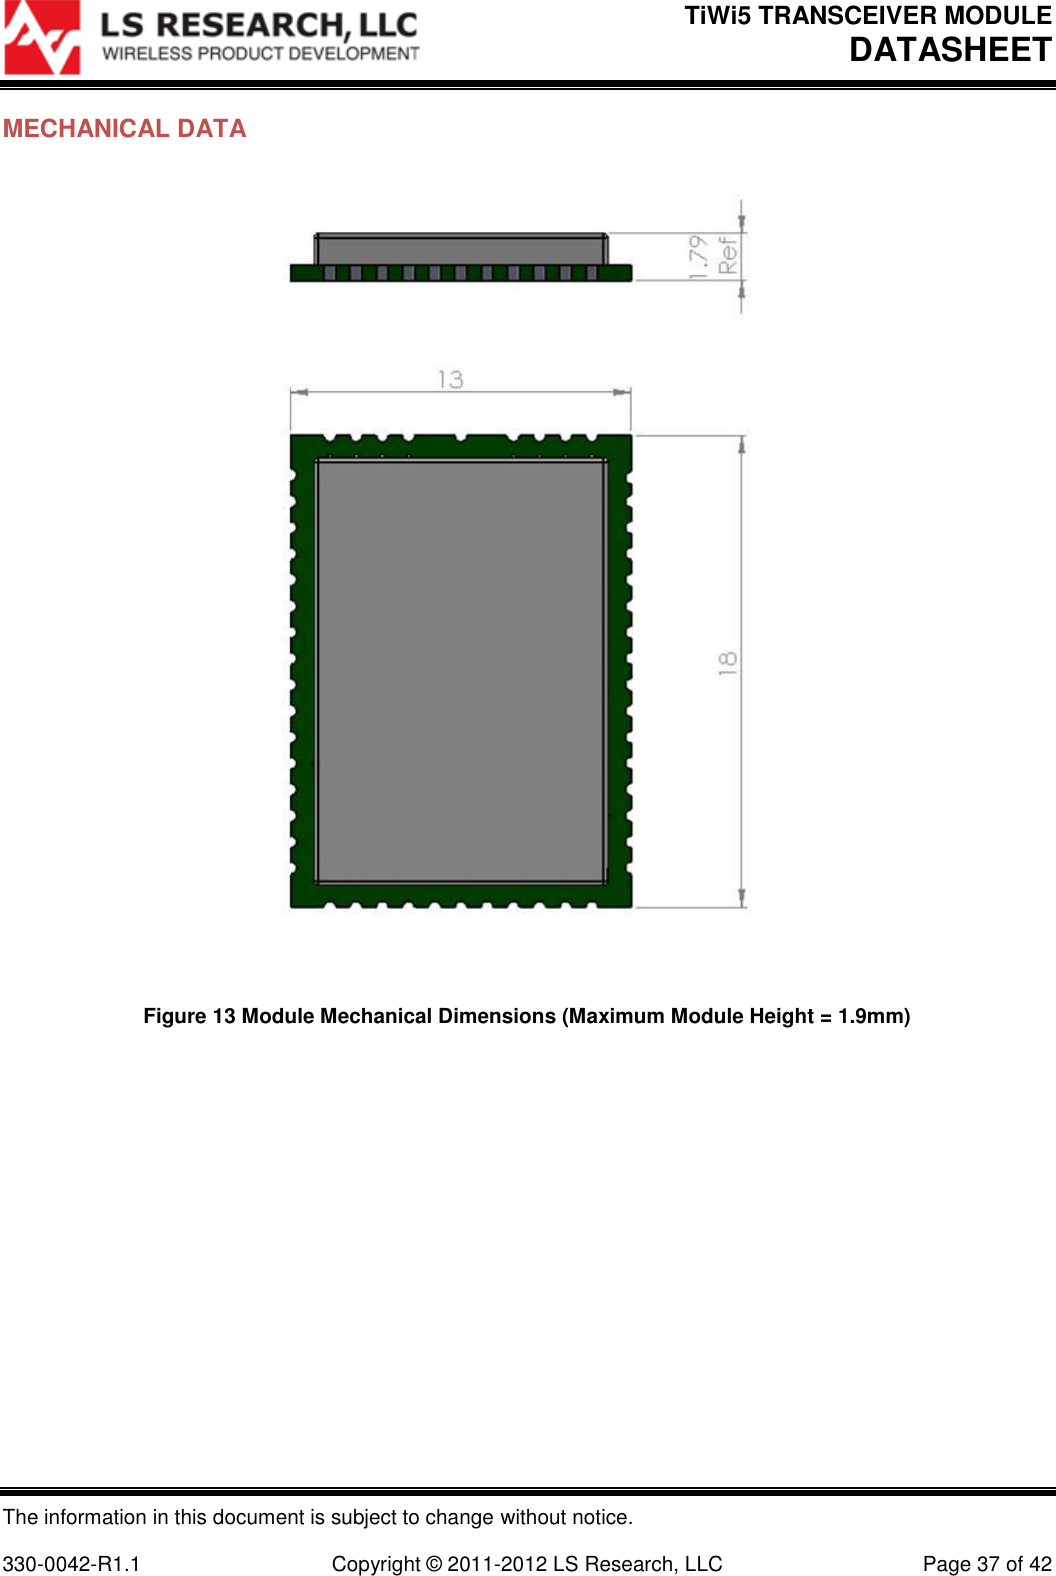 TiWi5 TRANSCEIVER MODULE DATASHEET  The information in this document is subject to change without notice.  330-0042-R1.1    Copyright © 2011-2012 LS Research, LLC  Page 37 of 42 MECHANICAL DATA   Figure 13 Module Mechanical Dimensions (Maximum Module Height = 1.9mm)  